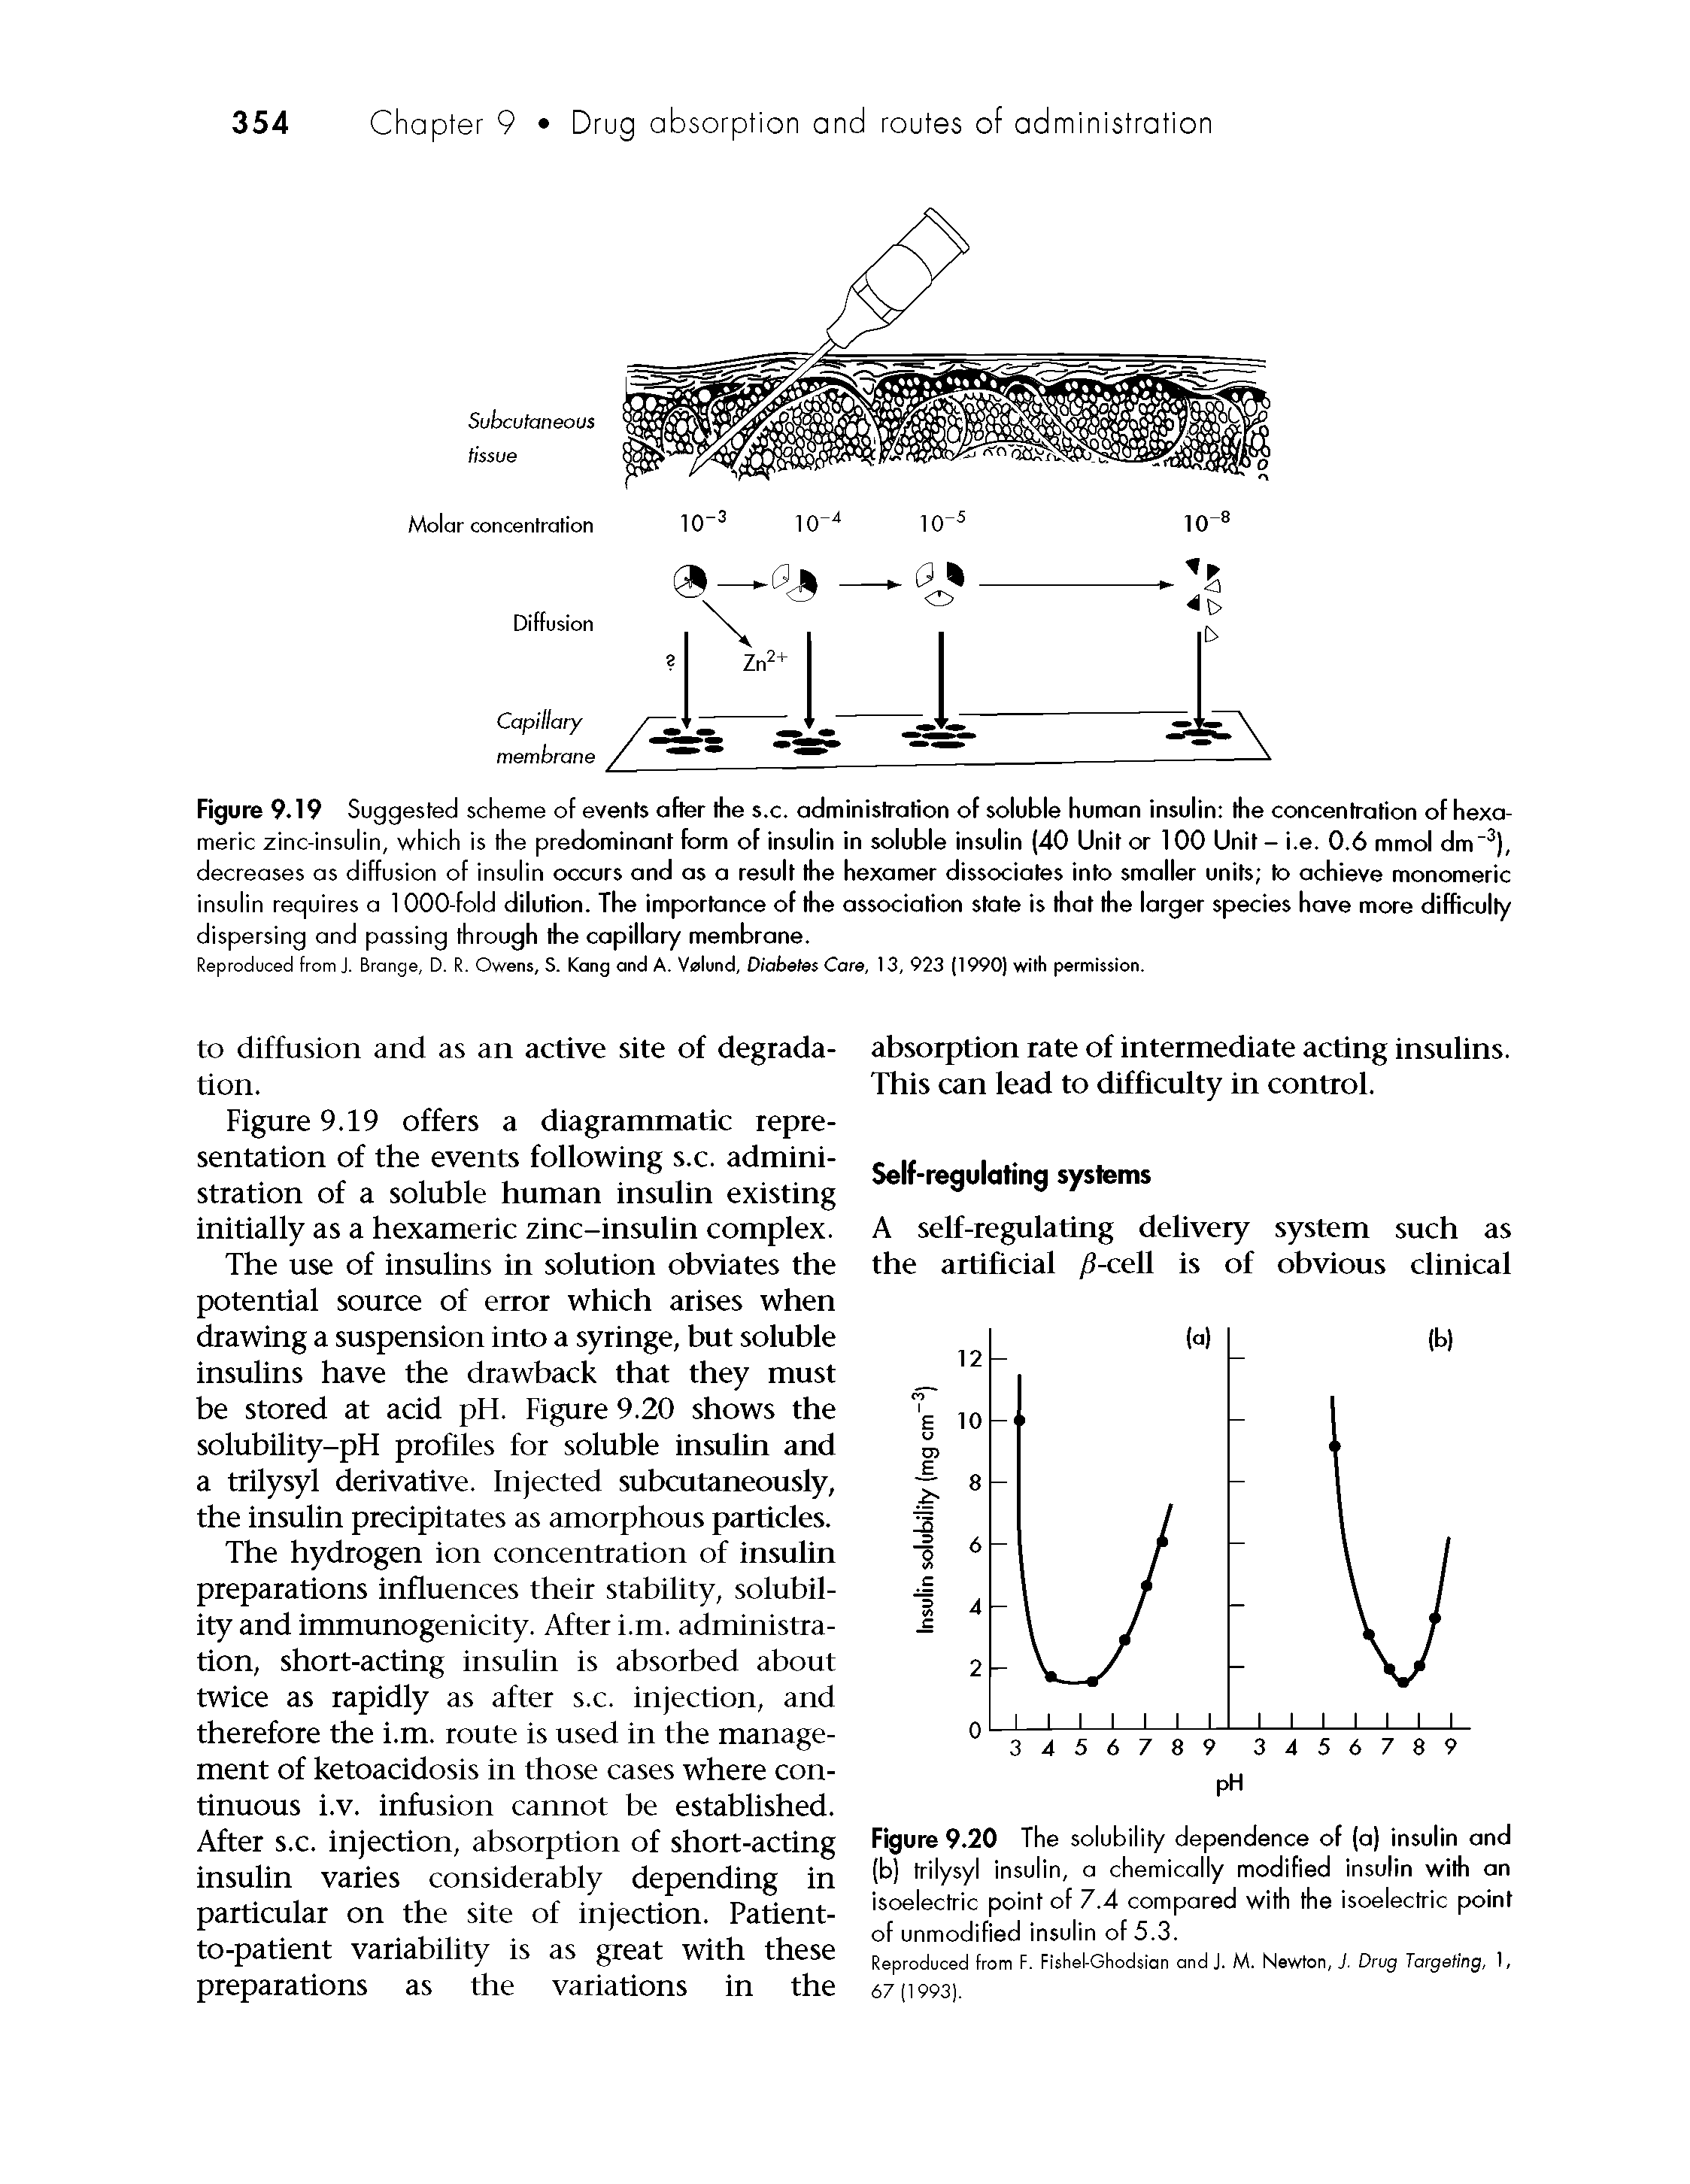 Figure 9.19 Suggested scheme of events after the s.c. administration of soluble human insulin the concentration of hexa-meric zinc-insulin, which is the predominant form of insulin in soluble insulin (40 Unit or 100 Unit - i.e. 0.6 mmol dm ), decreases as diffusion of insulin occurs and os a result the hexamer dissociates into smaller units to achieve monomeric insulin requires a 1000-fold dilution. The importance of the association state is that the larger species have more difficulty dispersing and passing through the capillary membrane.